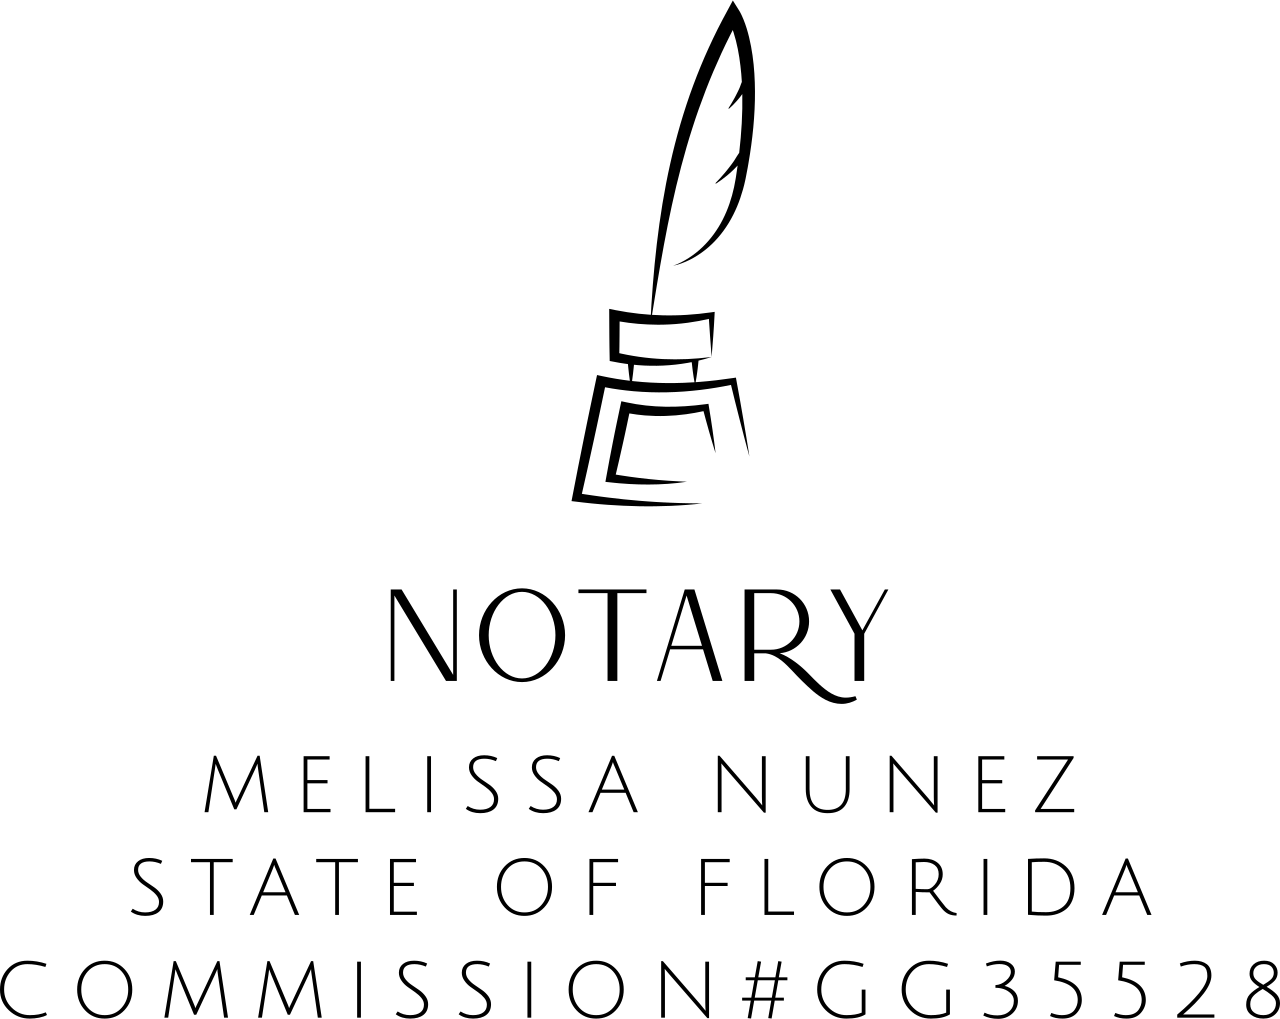 Notary Services's web page